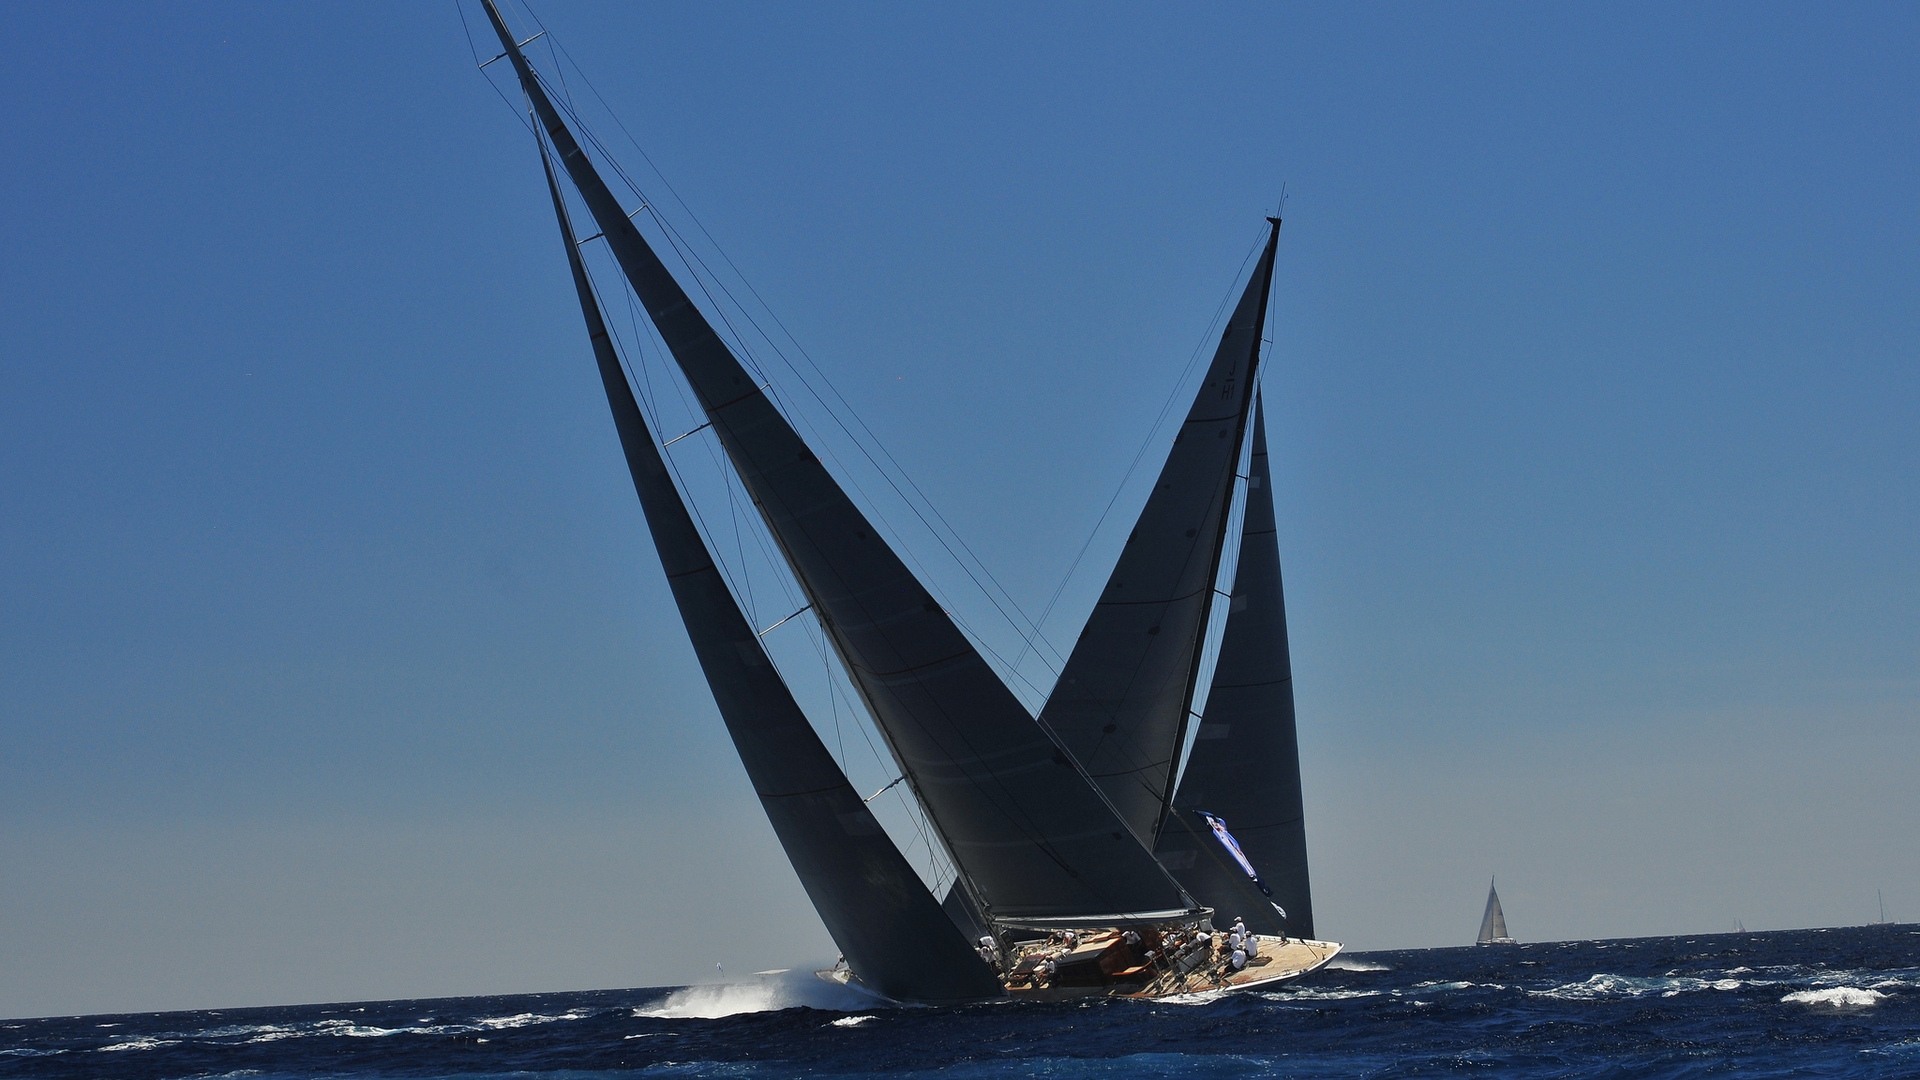 Sailing Yacht for 1920 x 1080 HDTV 1080p resolution